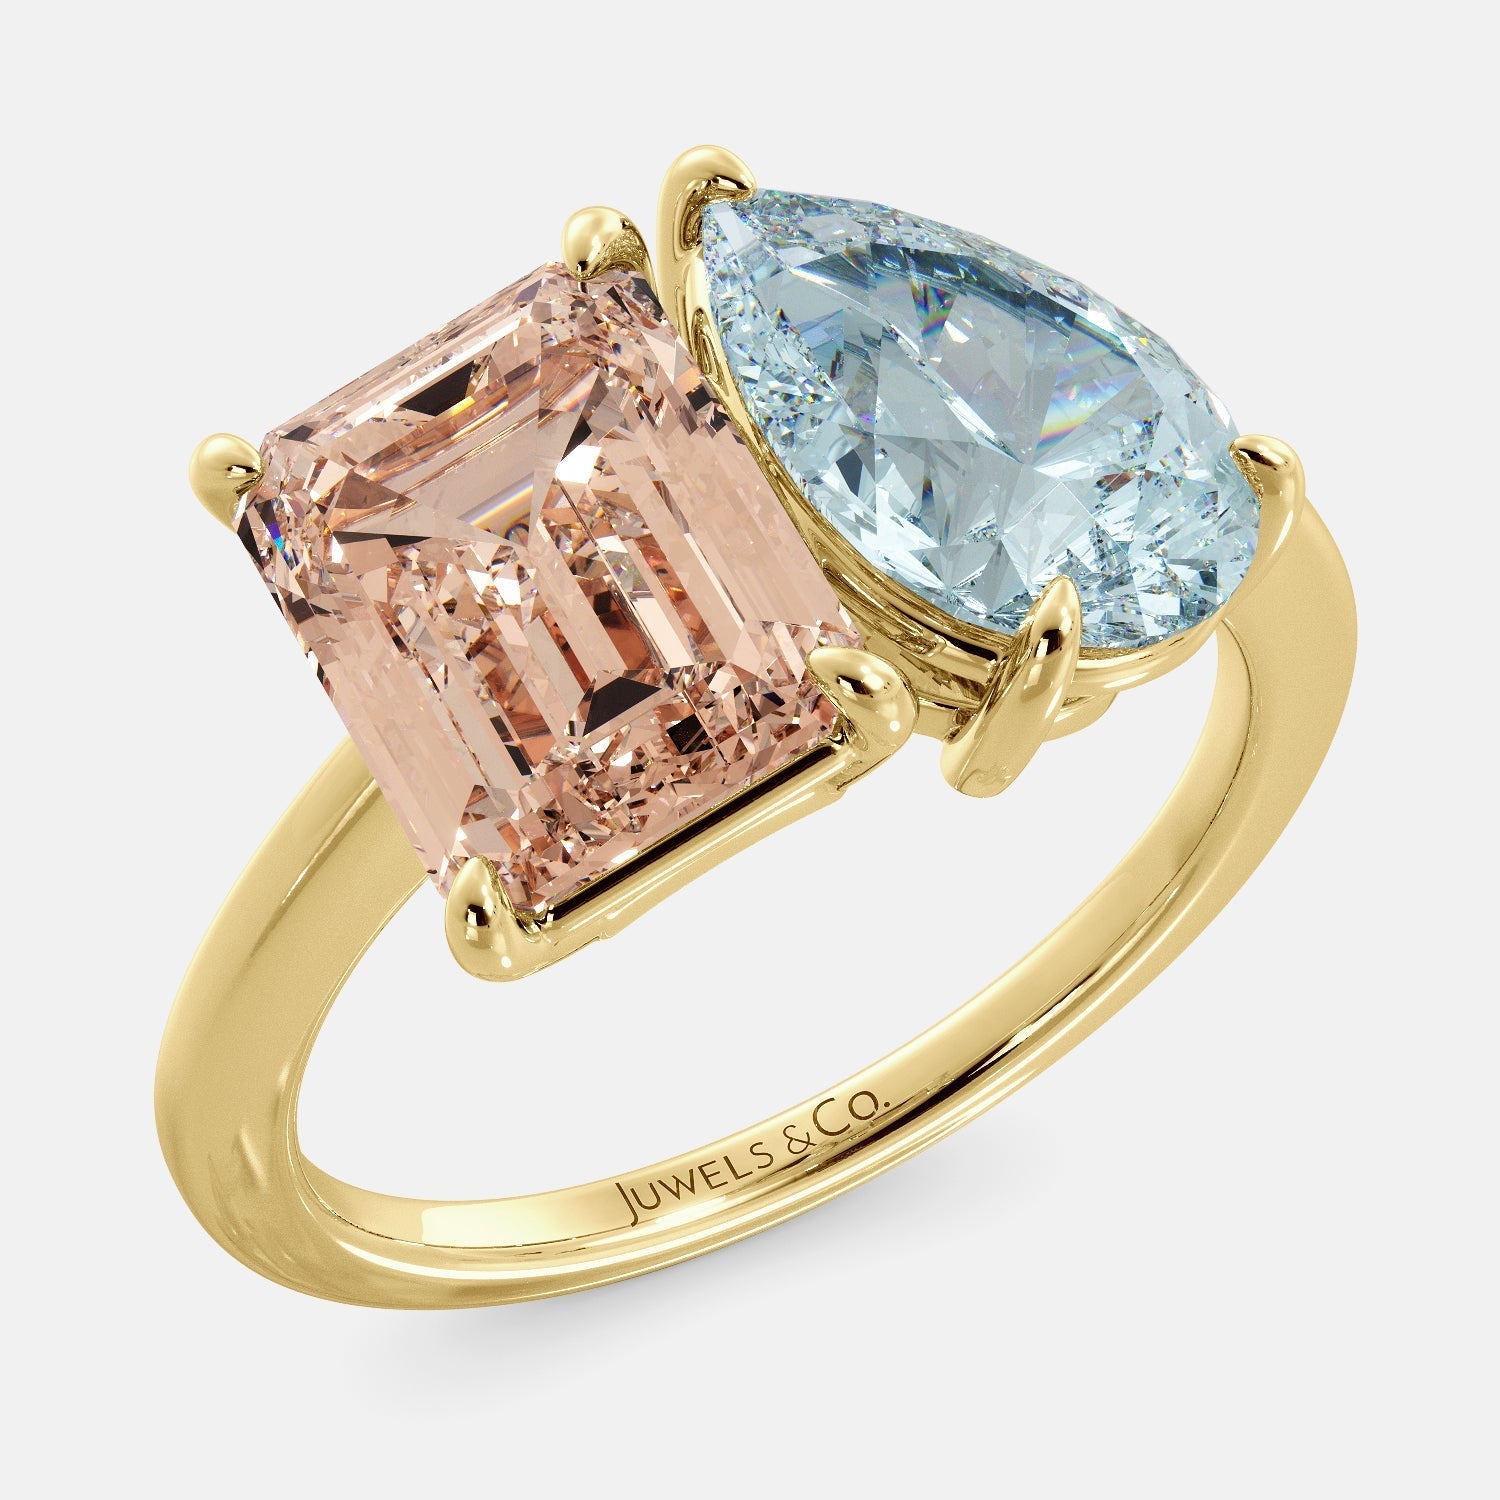 This image shows a toi et moi ring with a pear-shaped aquamarine and an emerald-cut morganite. The ring is set in a 14k yellow gold band and is available in all sizes. The morganite is a pink gemstone that is said to promote love, compassion, and forgiveness. The aquamarine is a blue gemstone that is said to promote spiritual growth and strengthen self-confidence. The toi et moi ring is a beautiful and unique way to show your love and commitment to someone special.